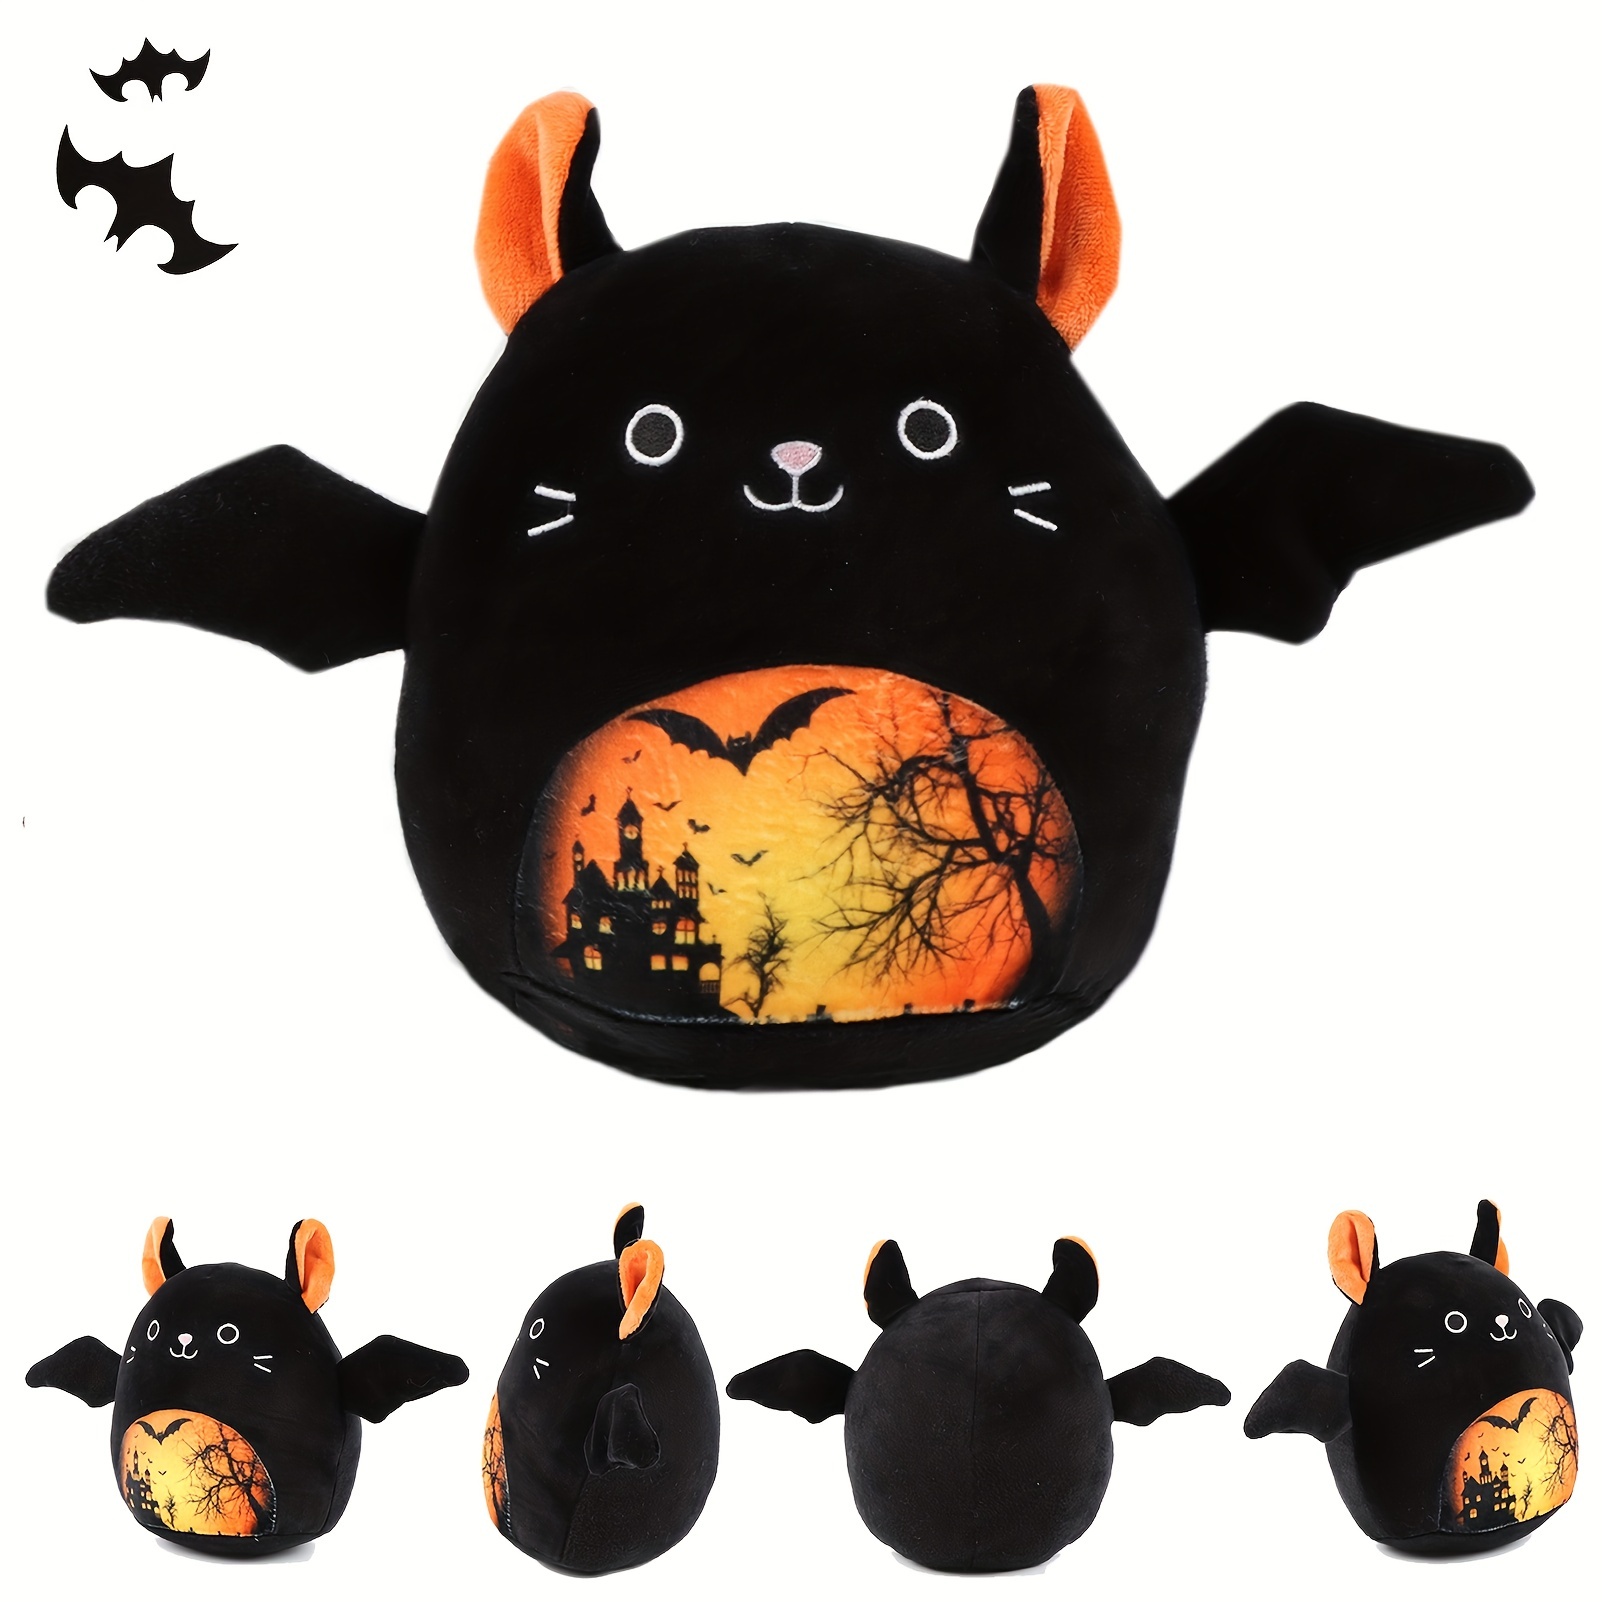 Buy LKMYHY 12 Creepy Goth Bunny Plush - Spooky Stuffed Animal Toy for  Halloween, Easter, Christmas, Birthday Gift (Black) Online at Low Prices in  India 